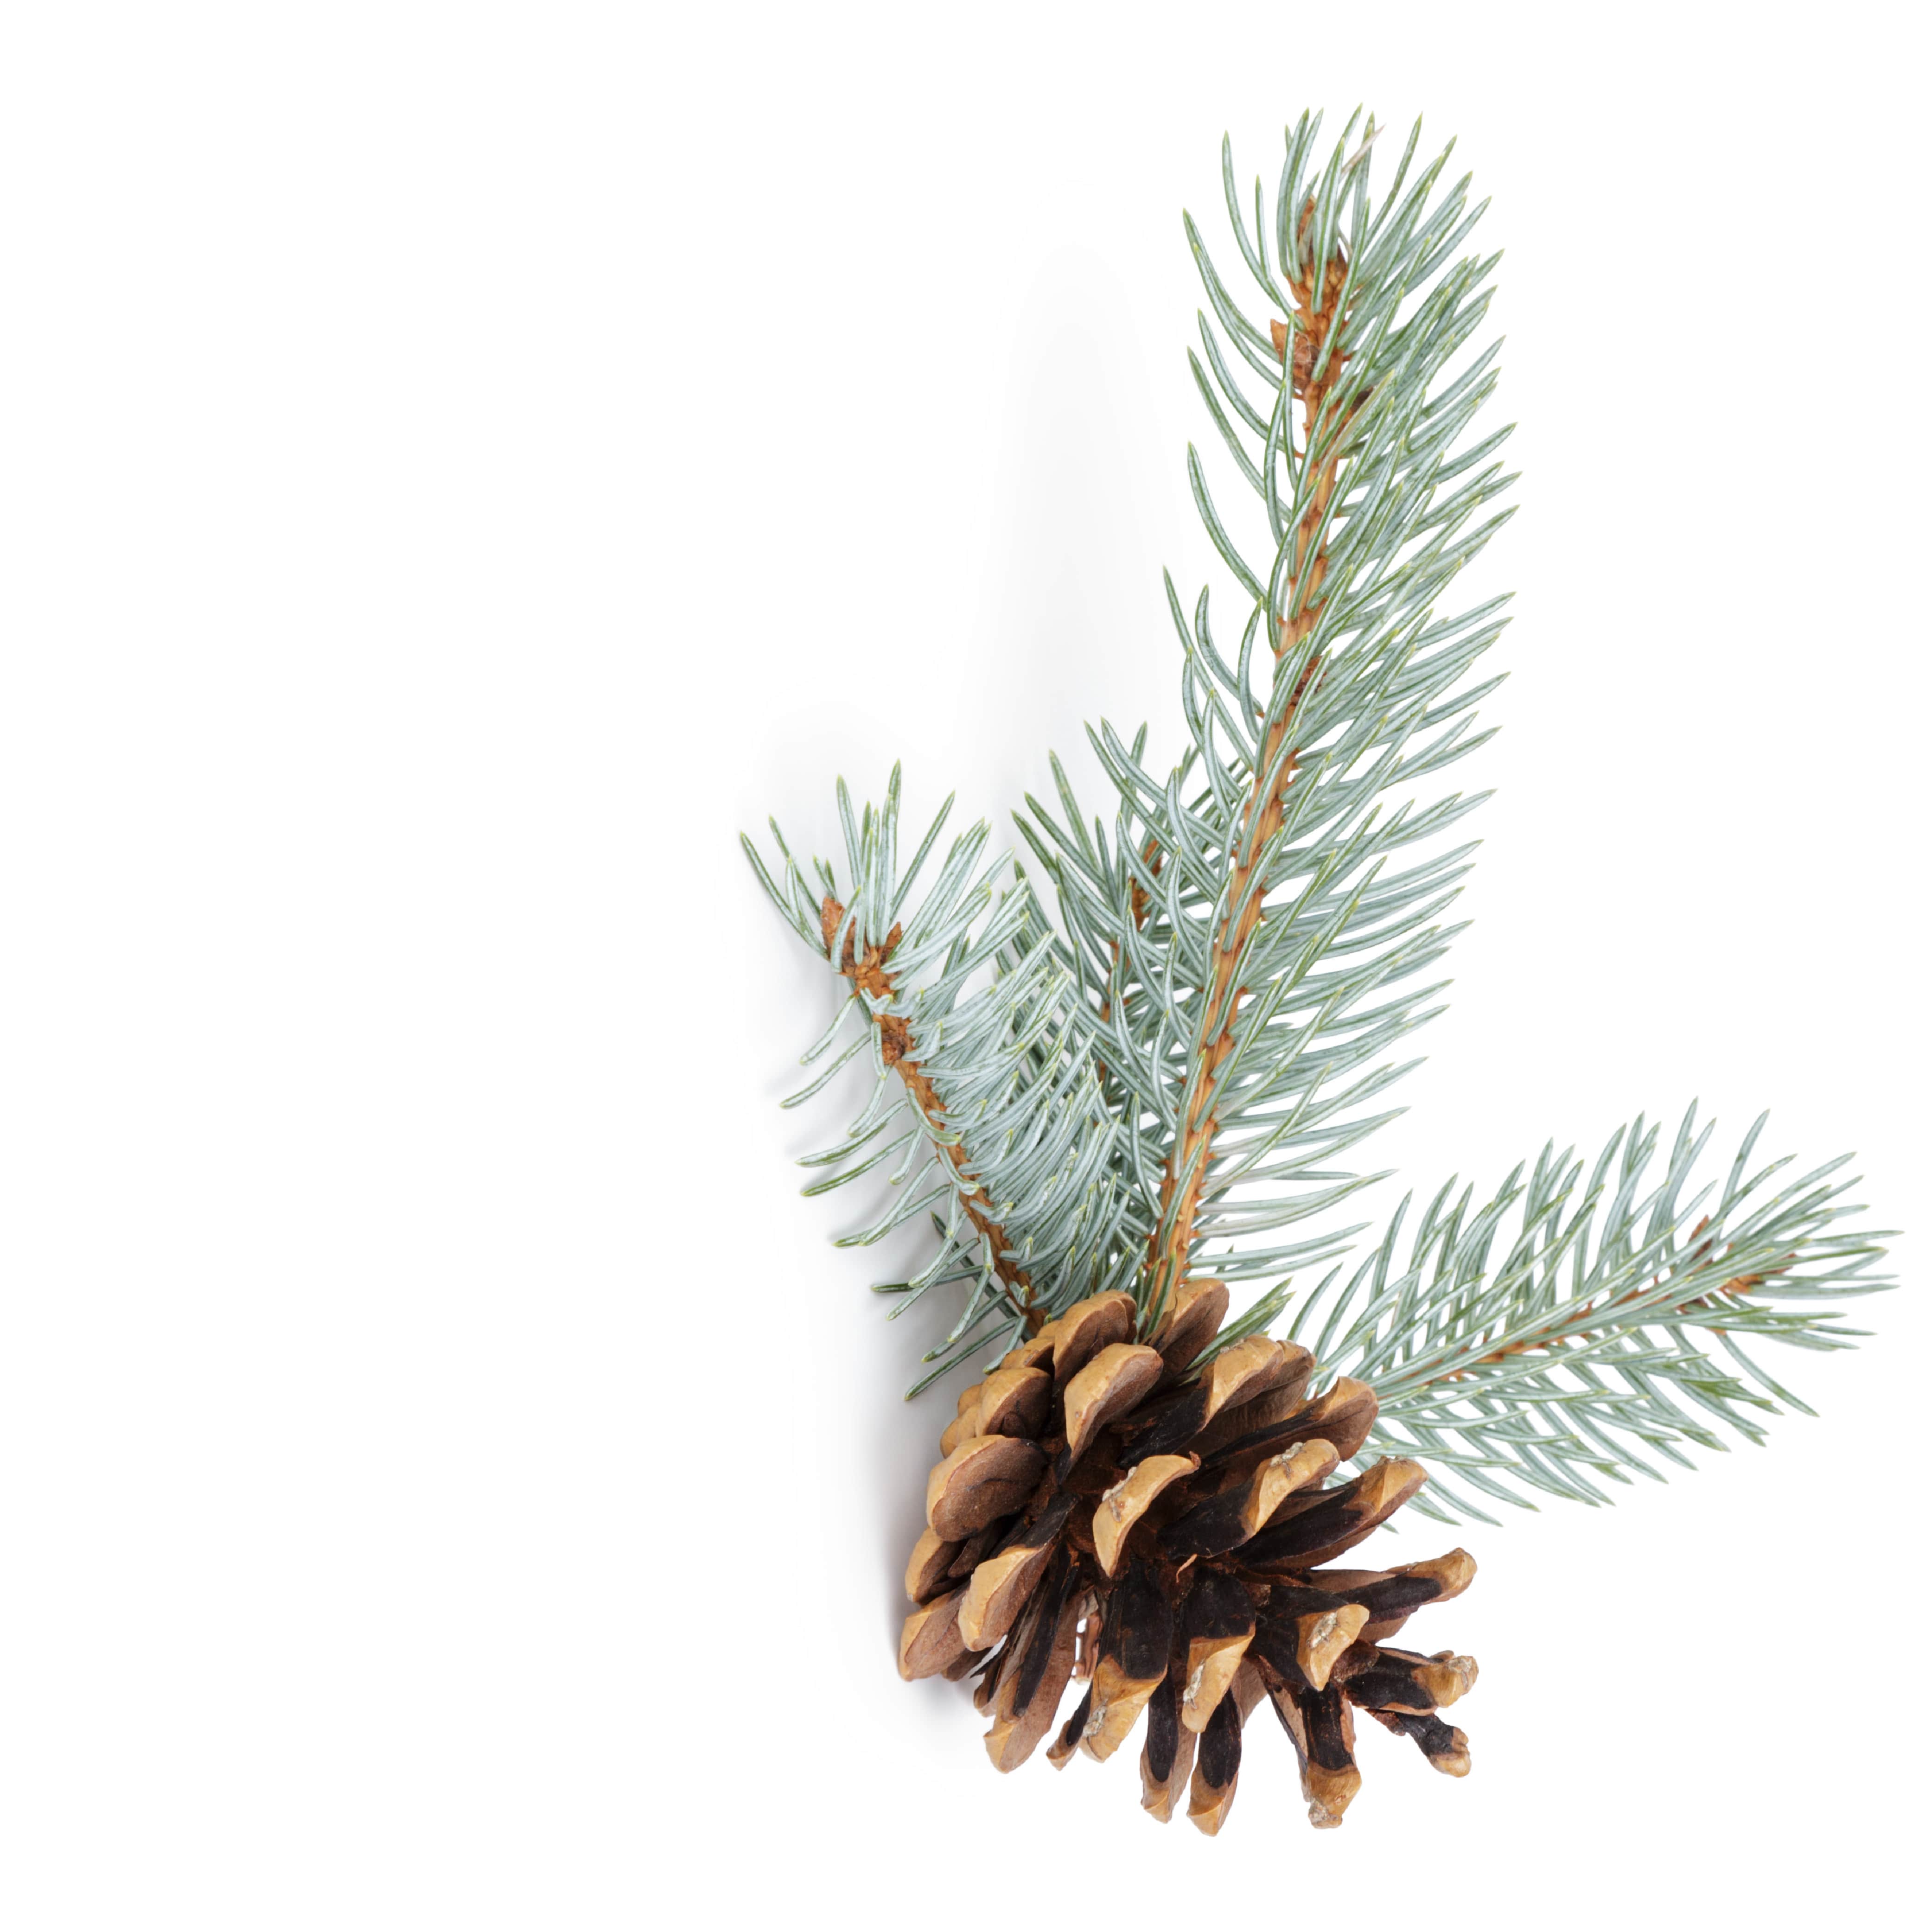 Blue Spruce Fragrance Oil for Cold Air Diffusers